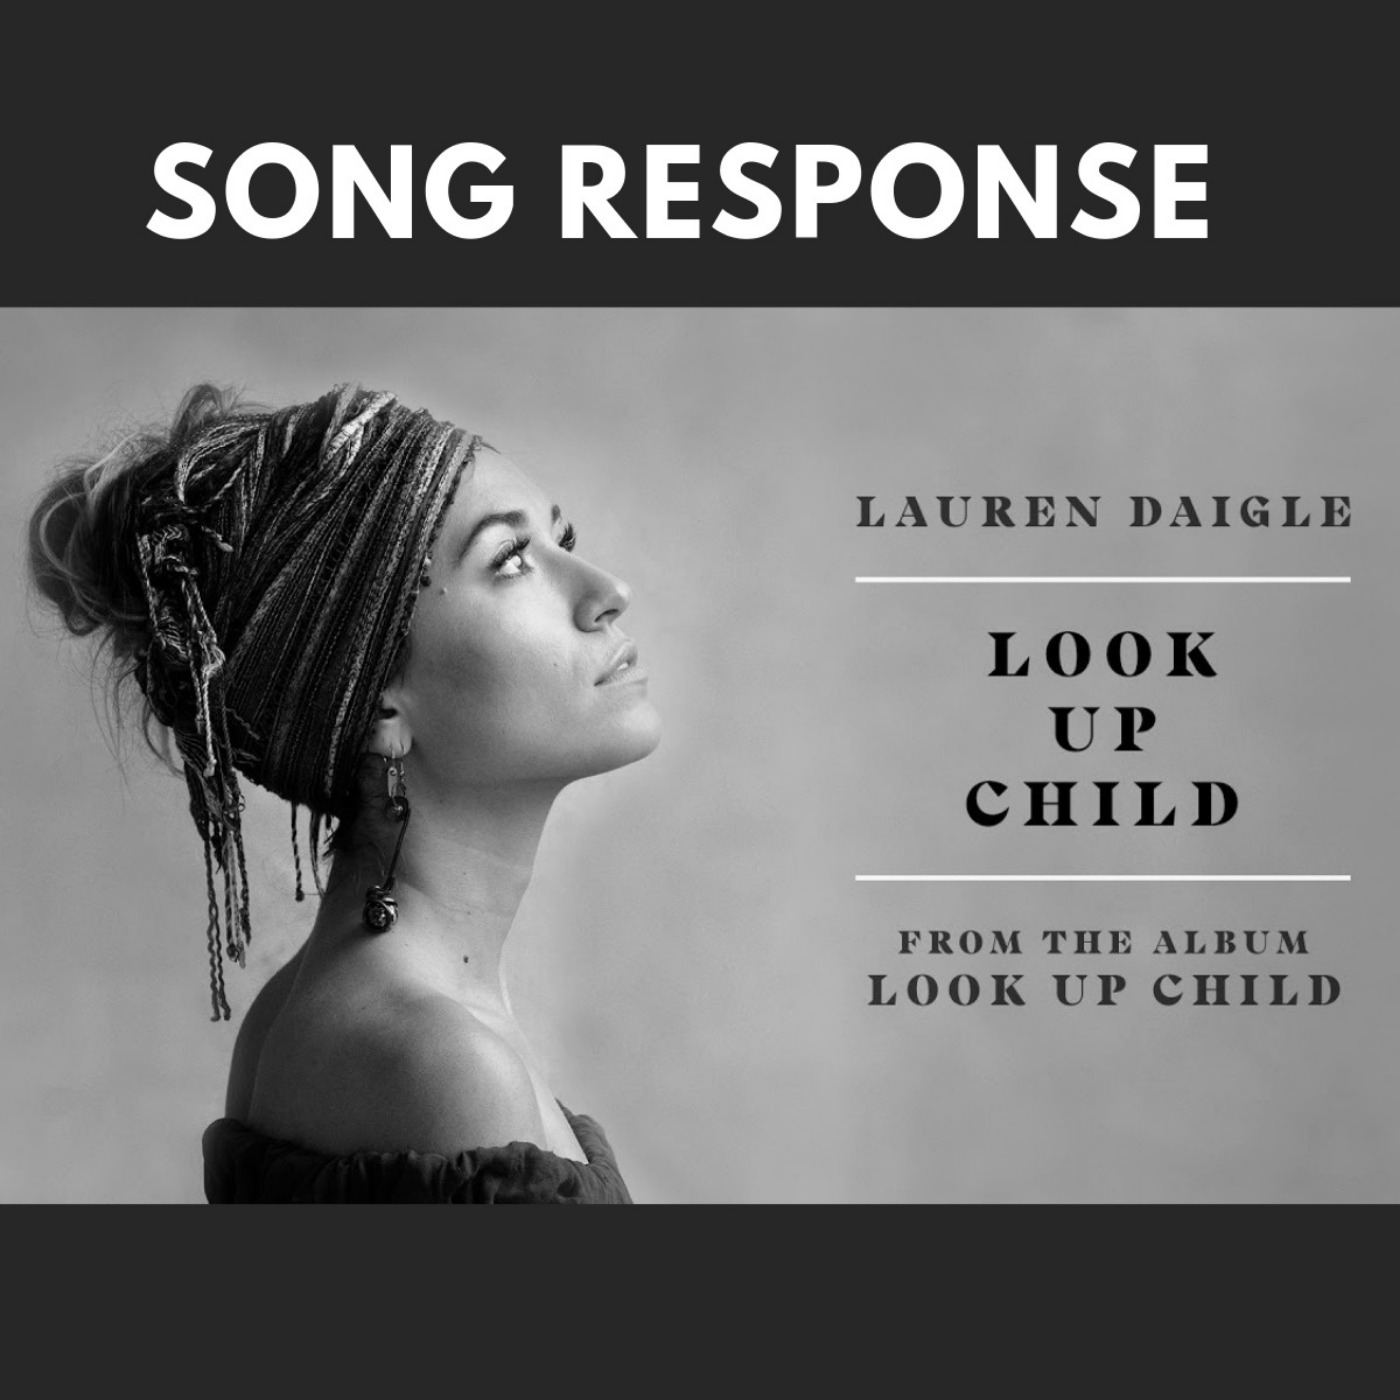 Song Response - Look Up Child by Lauren Daigle